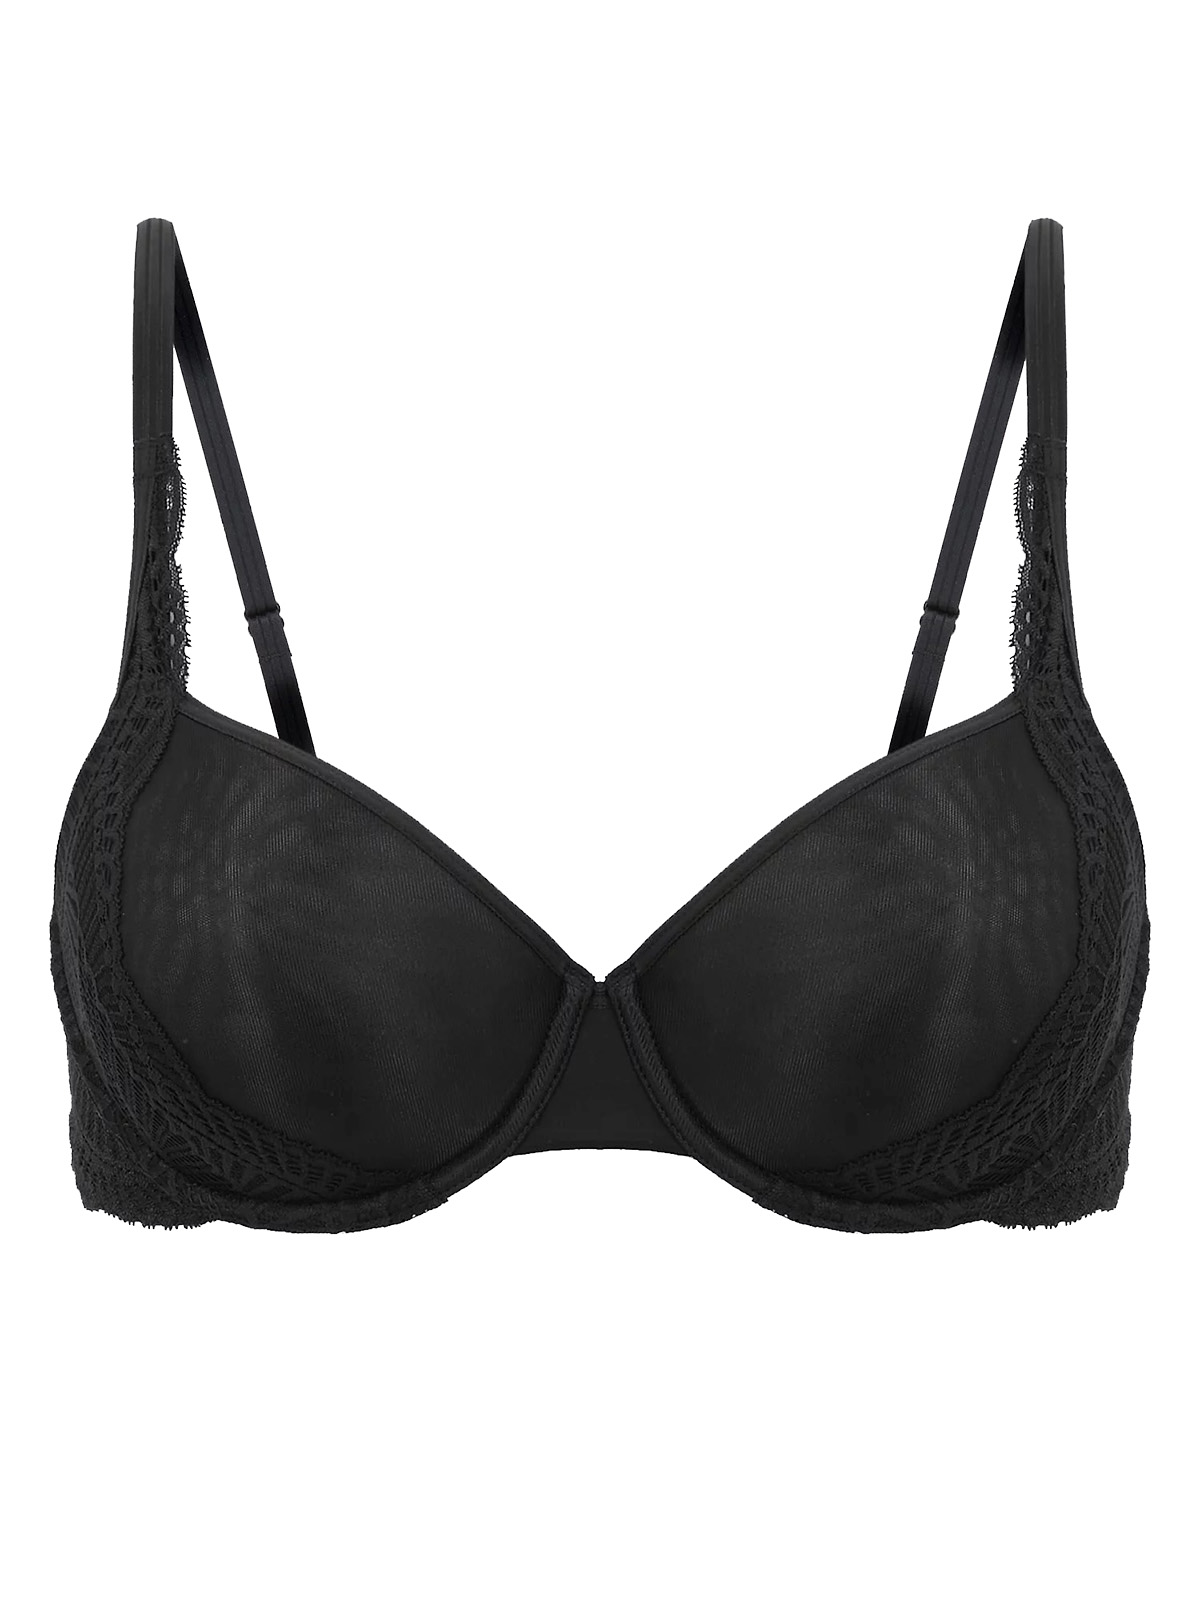 Marks and Spencer - - M&5 BLACK Light as Air Sheer Lace Padded Full Cup ...